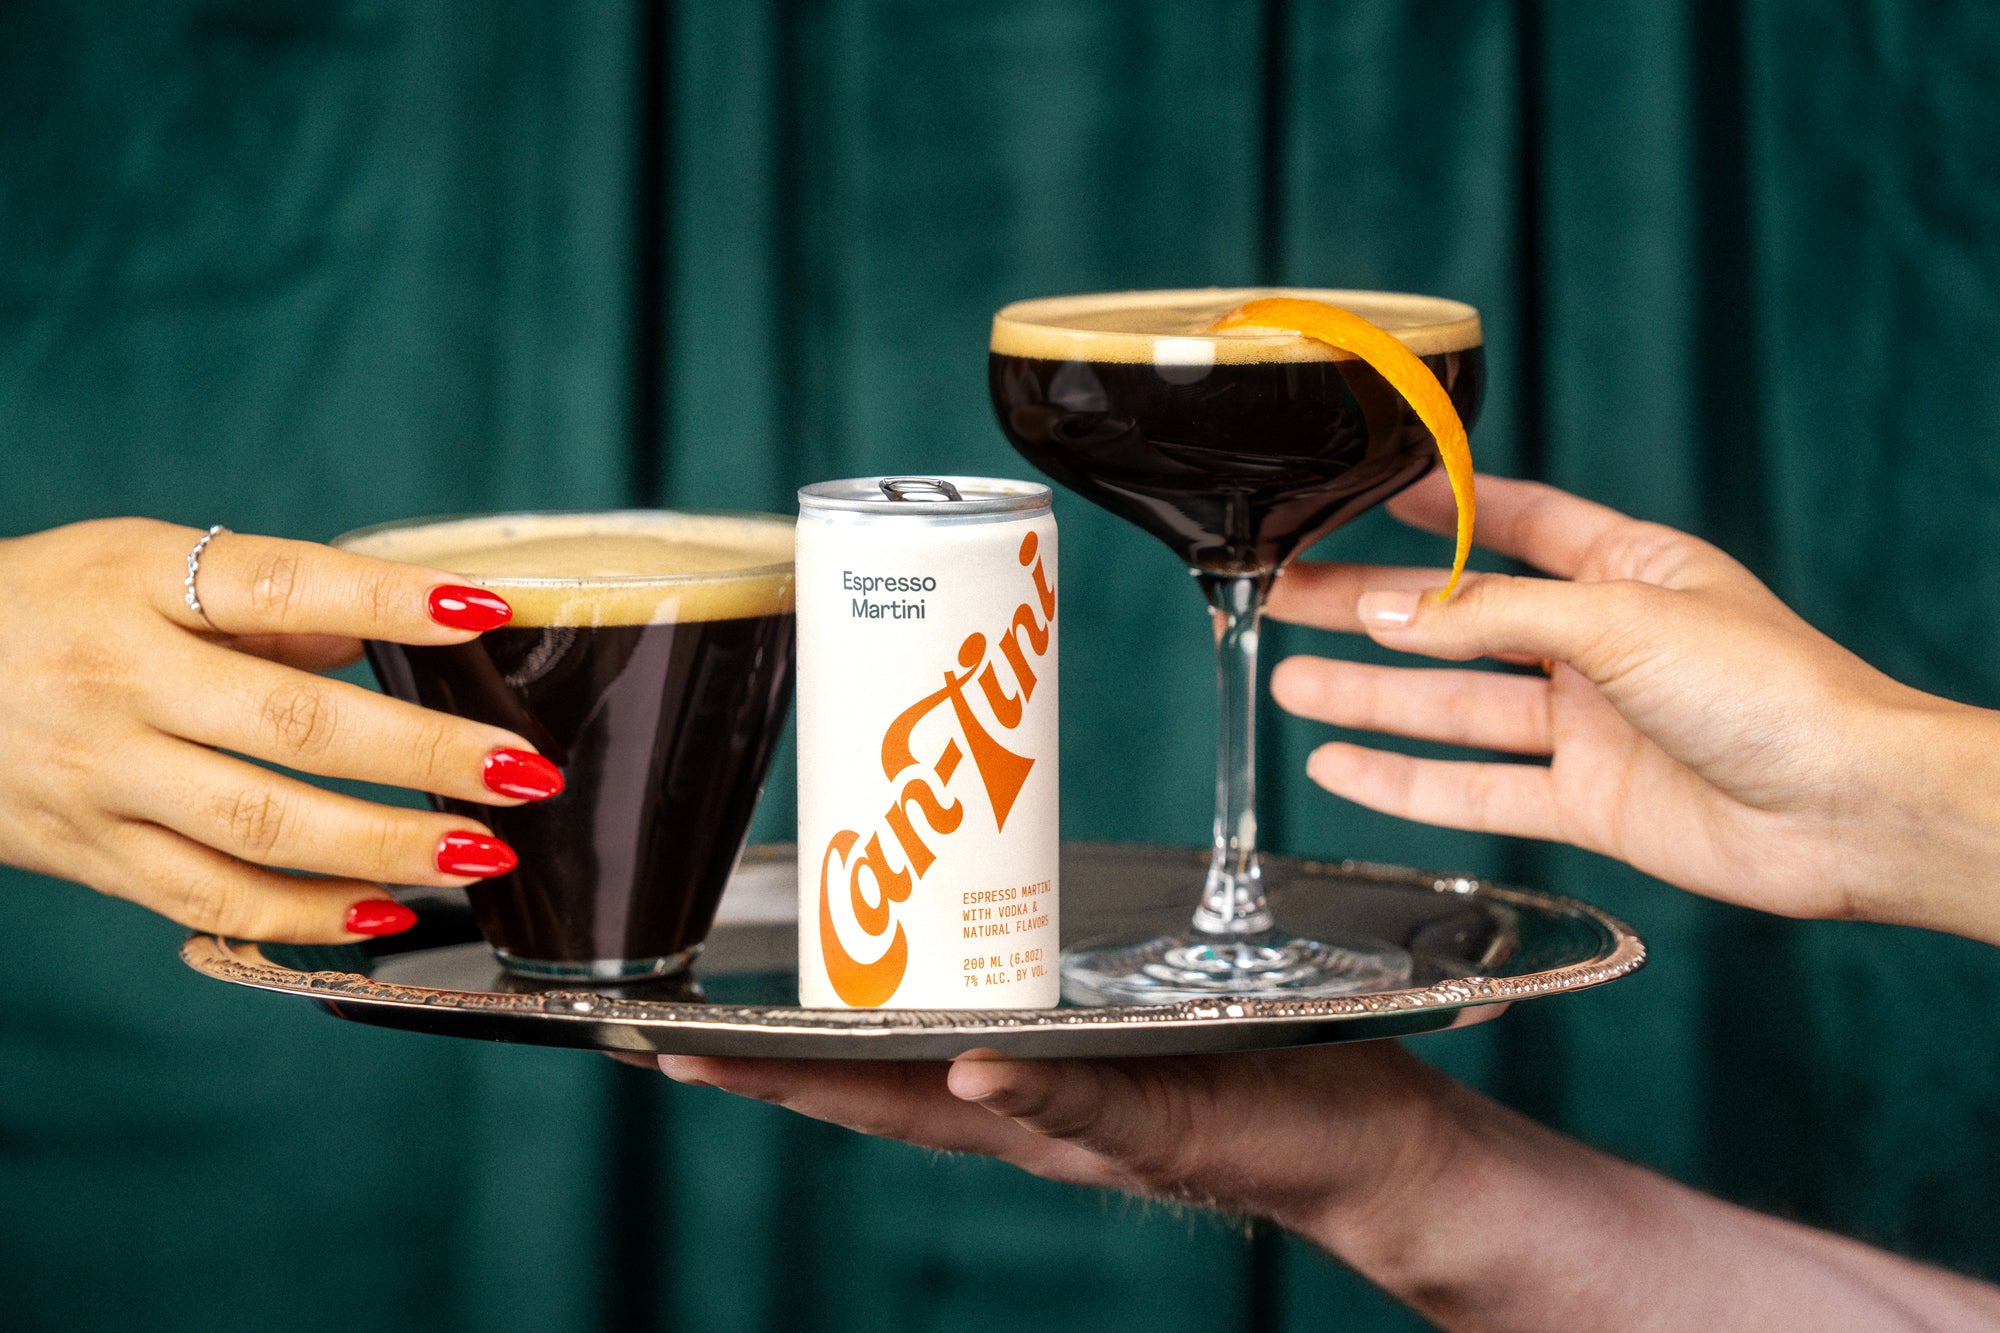 Canned Indulgence: The Espresso Martini Experience